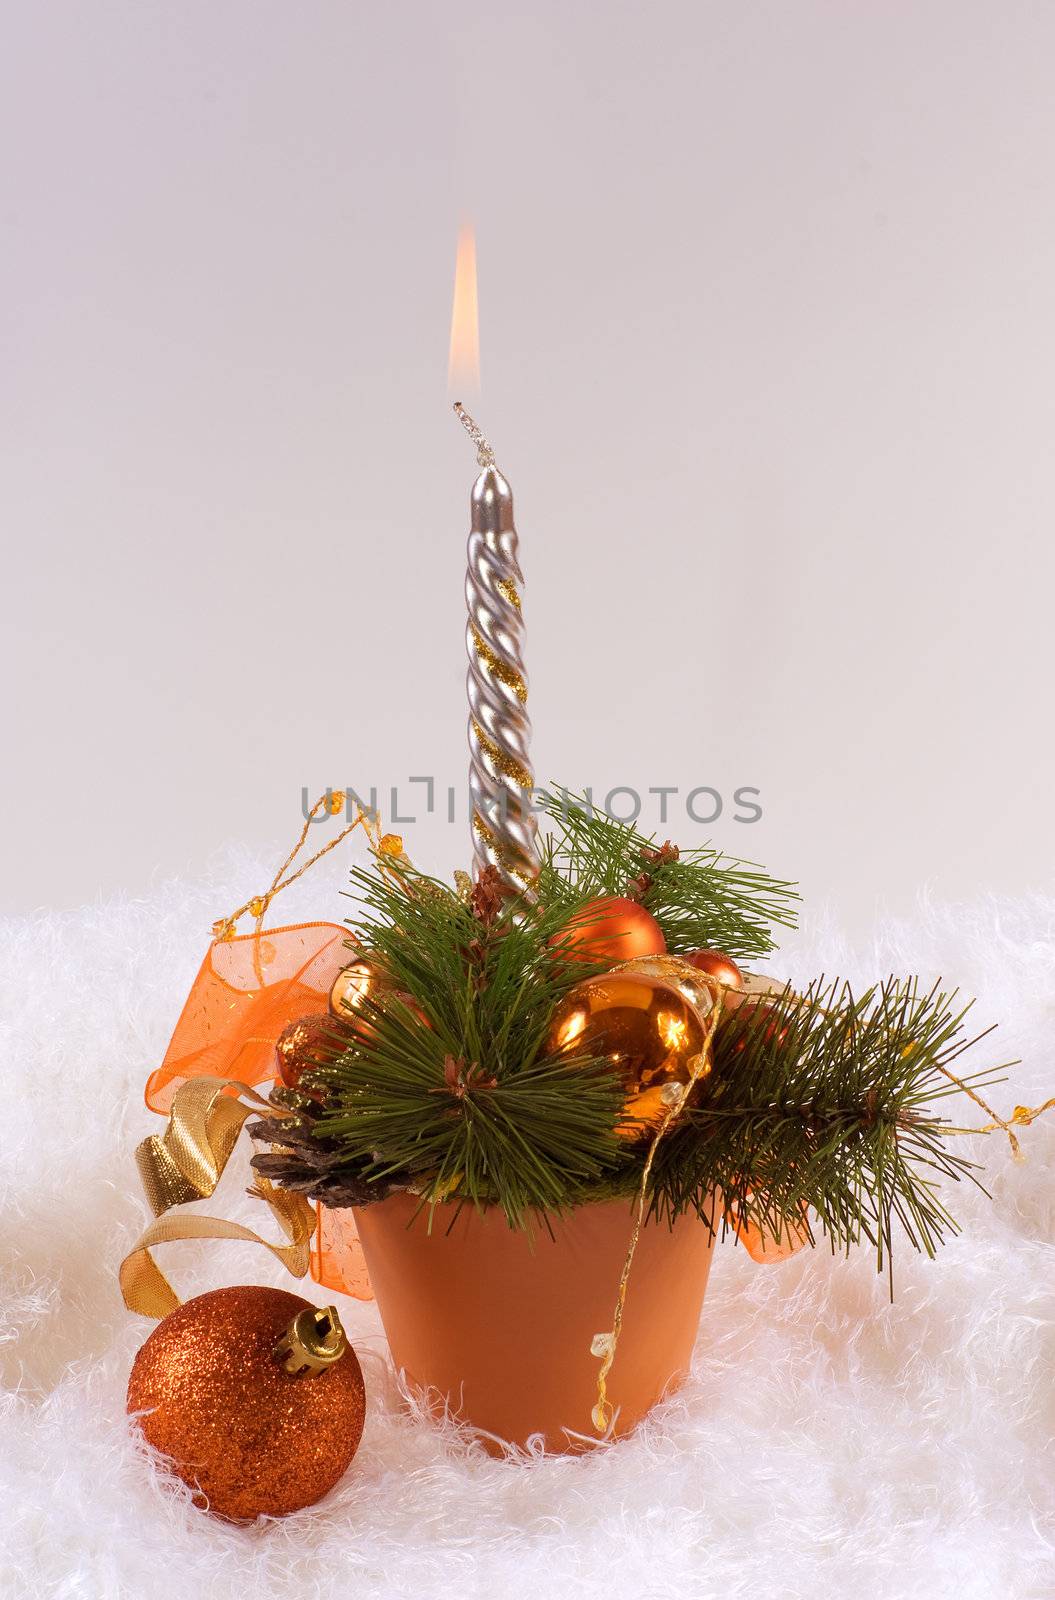 Christmas silver candles and red spheres on white skin